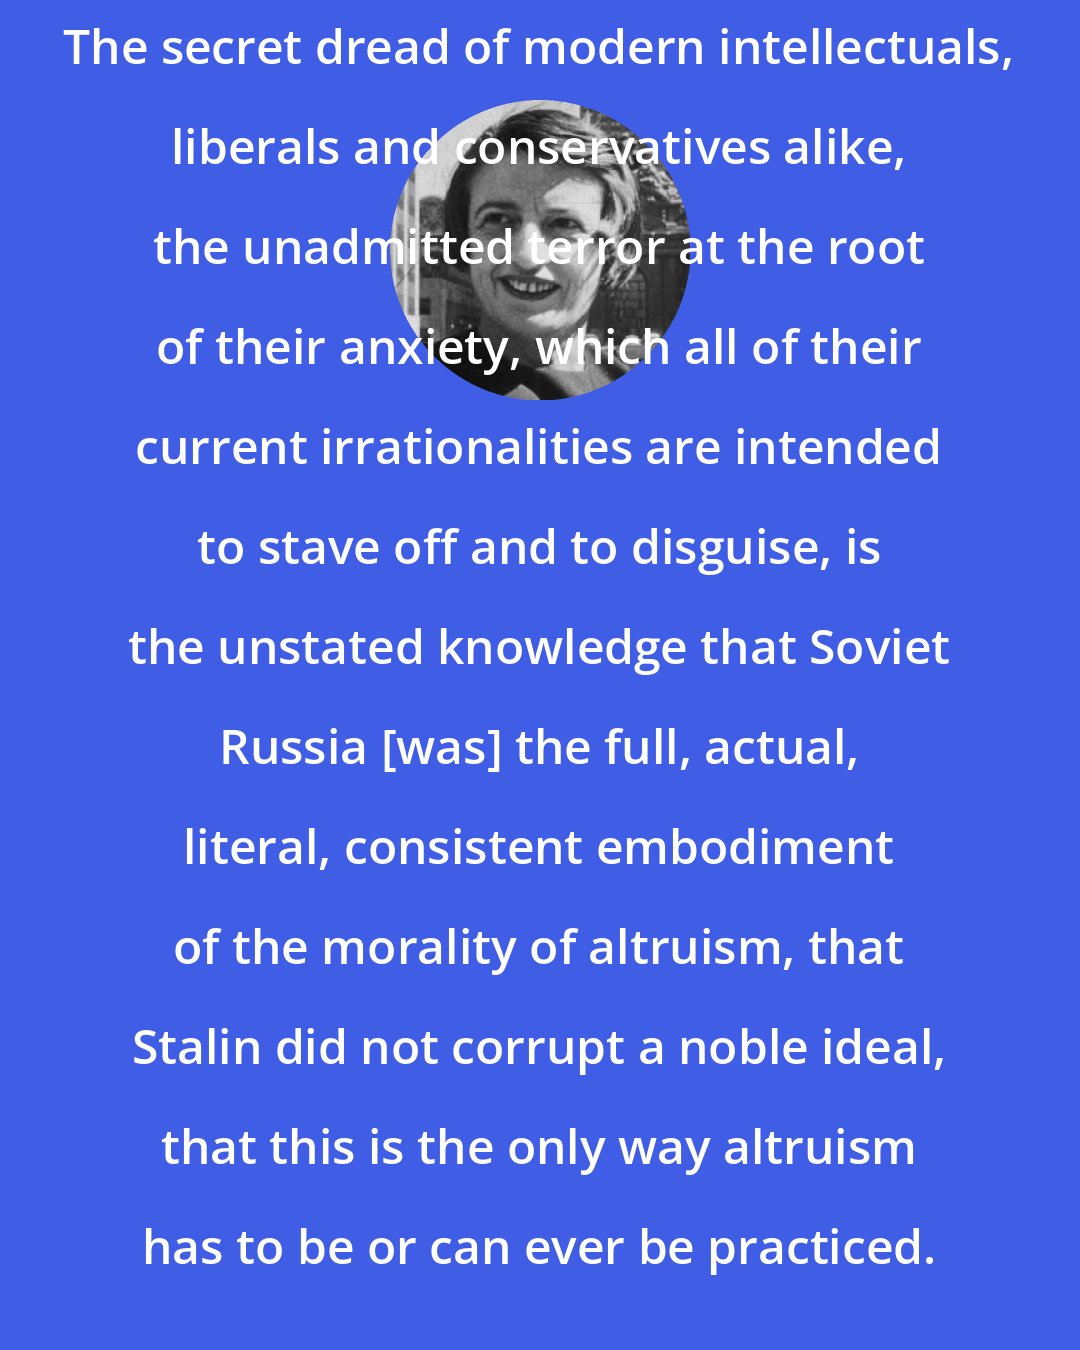 Ayn Rand: The secret dread of modern intellectuals, liberals and conservatives alike, the unadmitted terror at the root of their anxiety, which all of their current irrationalities are intended to stave off and to disguise, is the unstated knowledge that Soviet Russia [was] the full, actual, literal, consistent embodiment of the morality of altruism, that Stalin did not corrupt a noble ideal, that this is the only way altruism has to be or can ever be practiced.